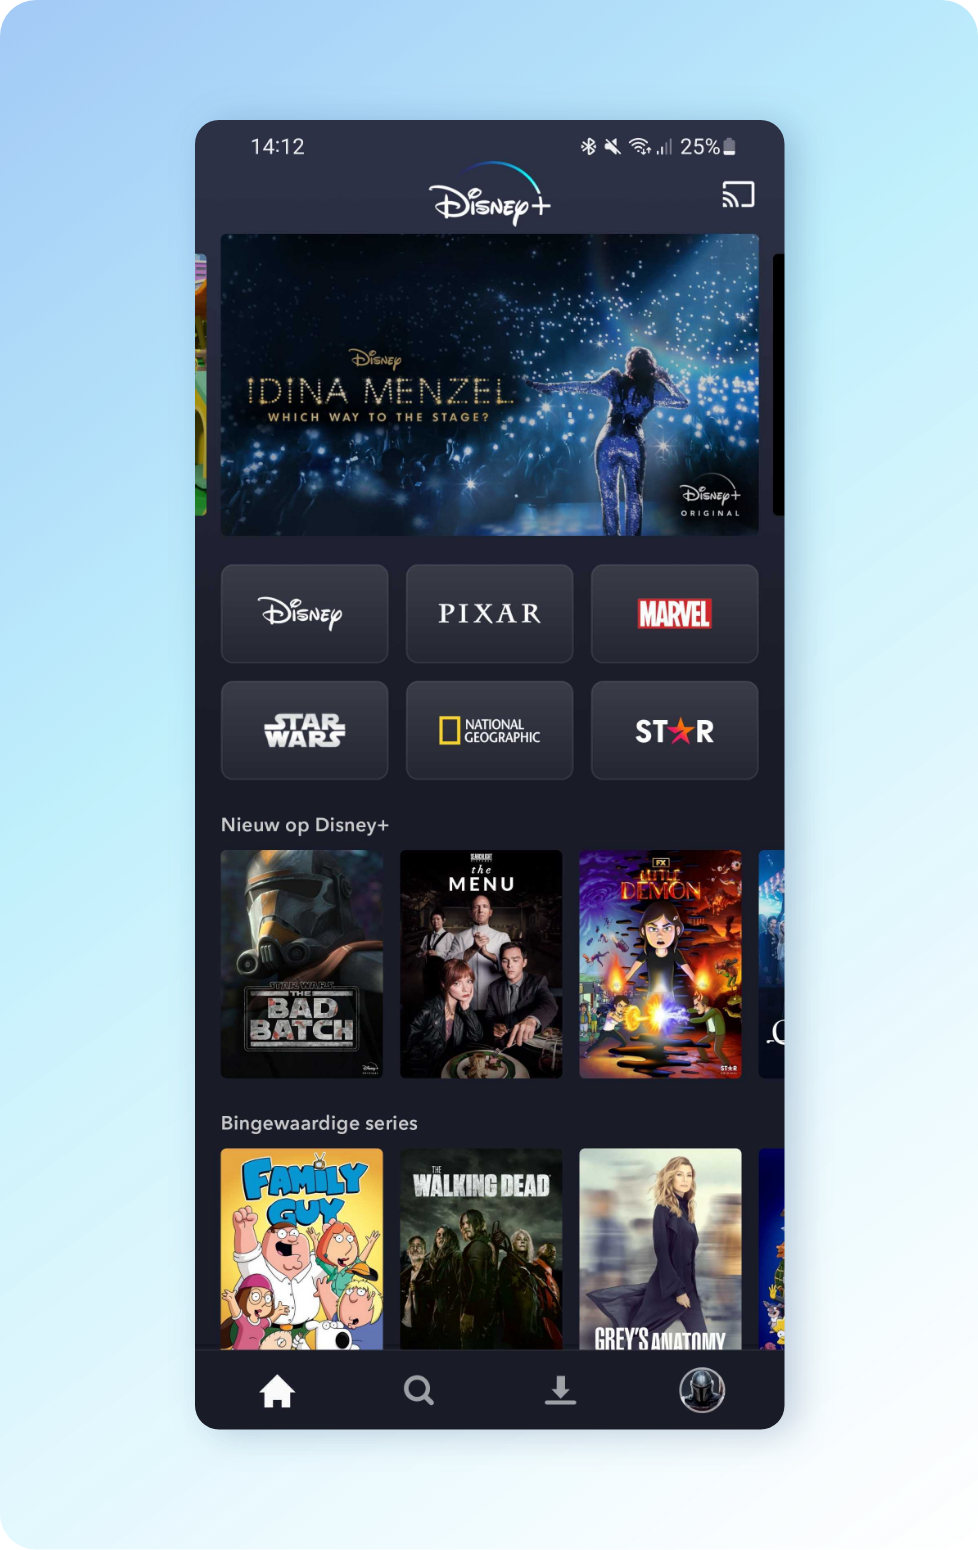 A complete mockup of the current Disney+ homepage, showing featured content, collections and popular shows